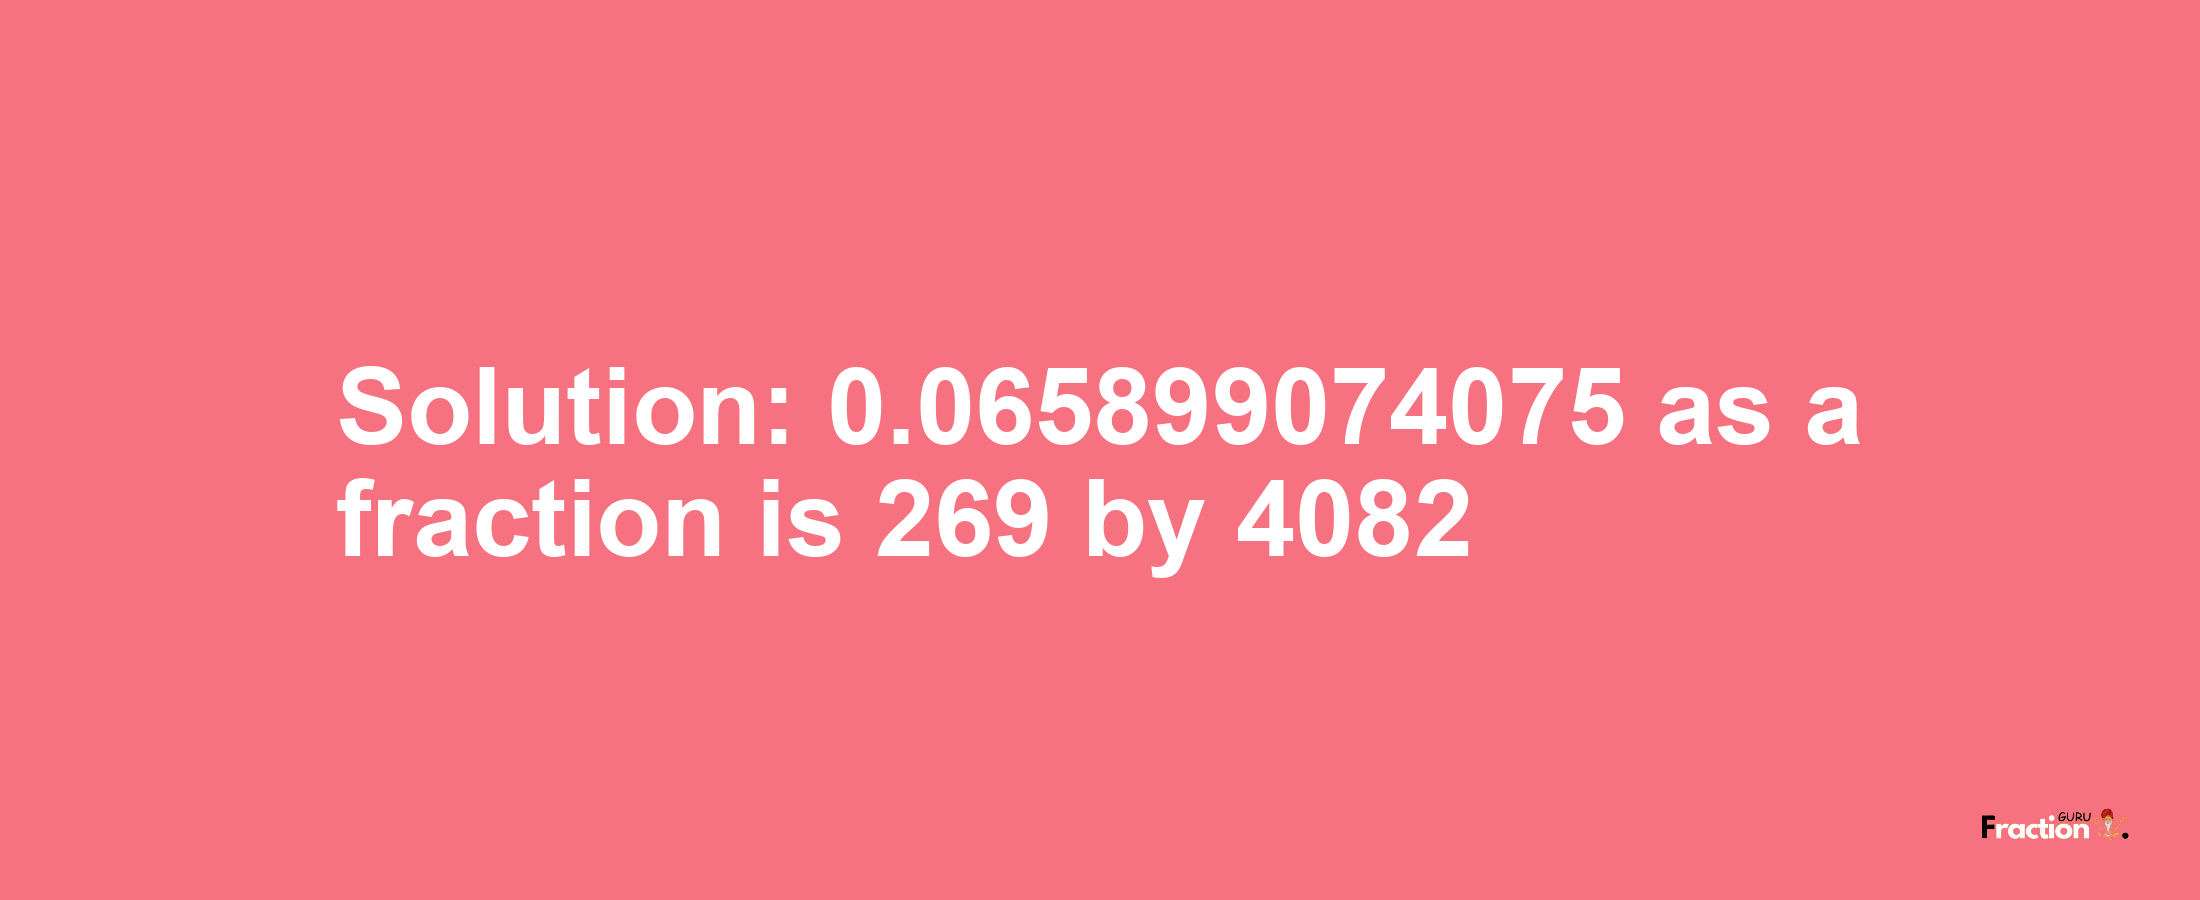 Solution:0.065899074075 as a fraction is 269/4082